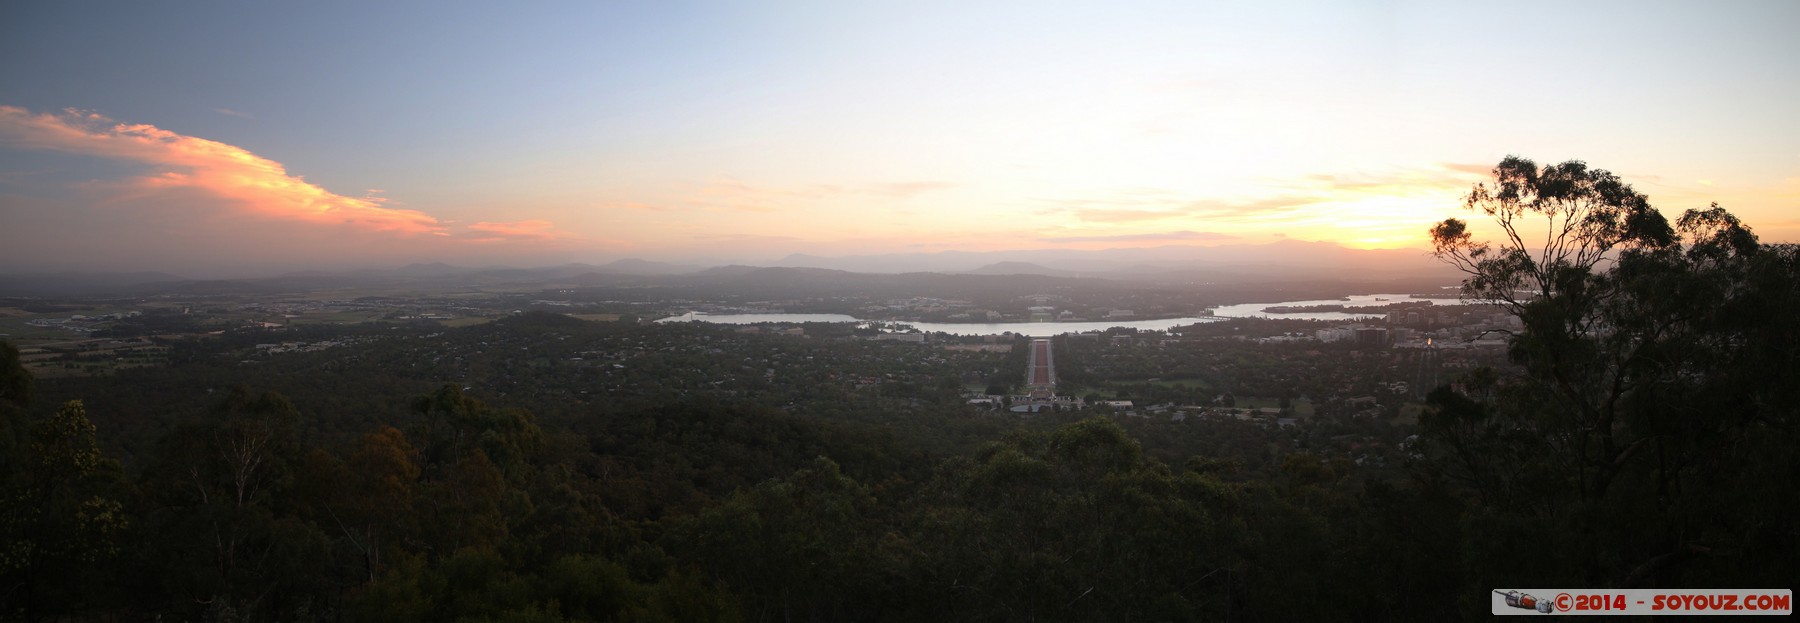 Canberra - Sunset from Mount Ainslie - Panorama
Stitched Panorama
Mots-clés: Ainslie AUS Australian Capital Territory Australie geo:lat=-35.27044646 geo:lon=149.15787057 geotagged Mount Ainslie sunset panorama